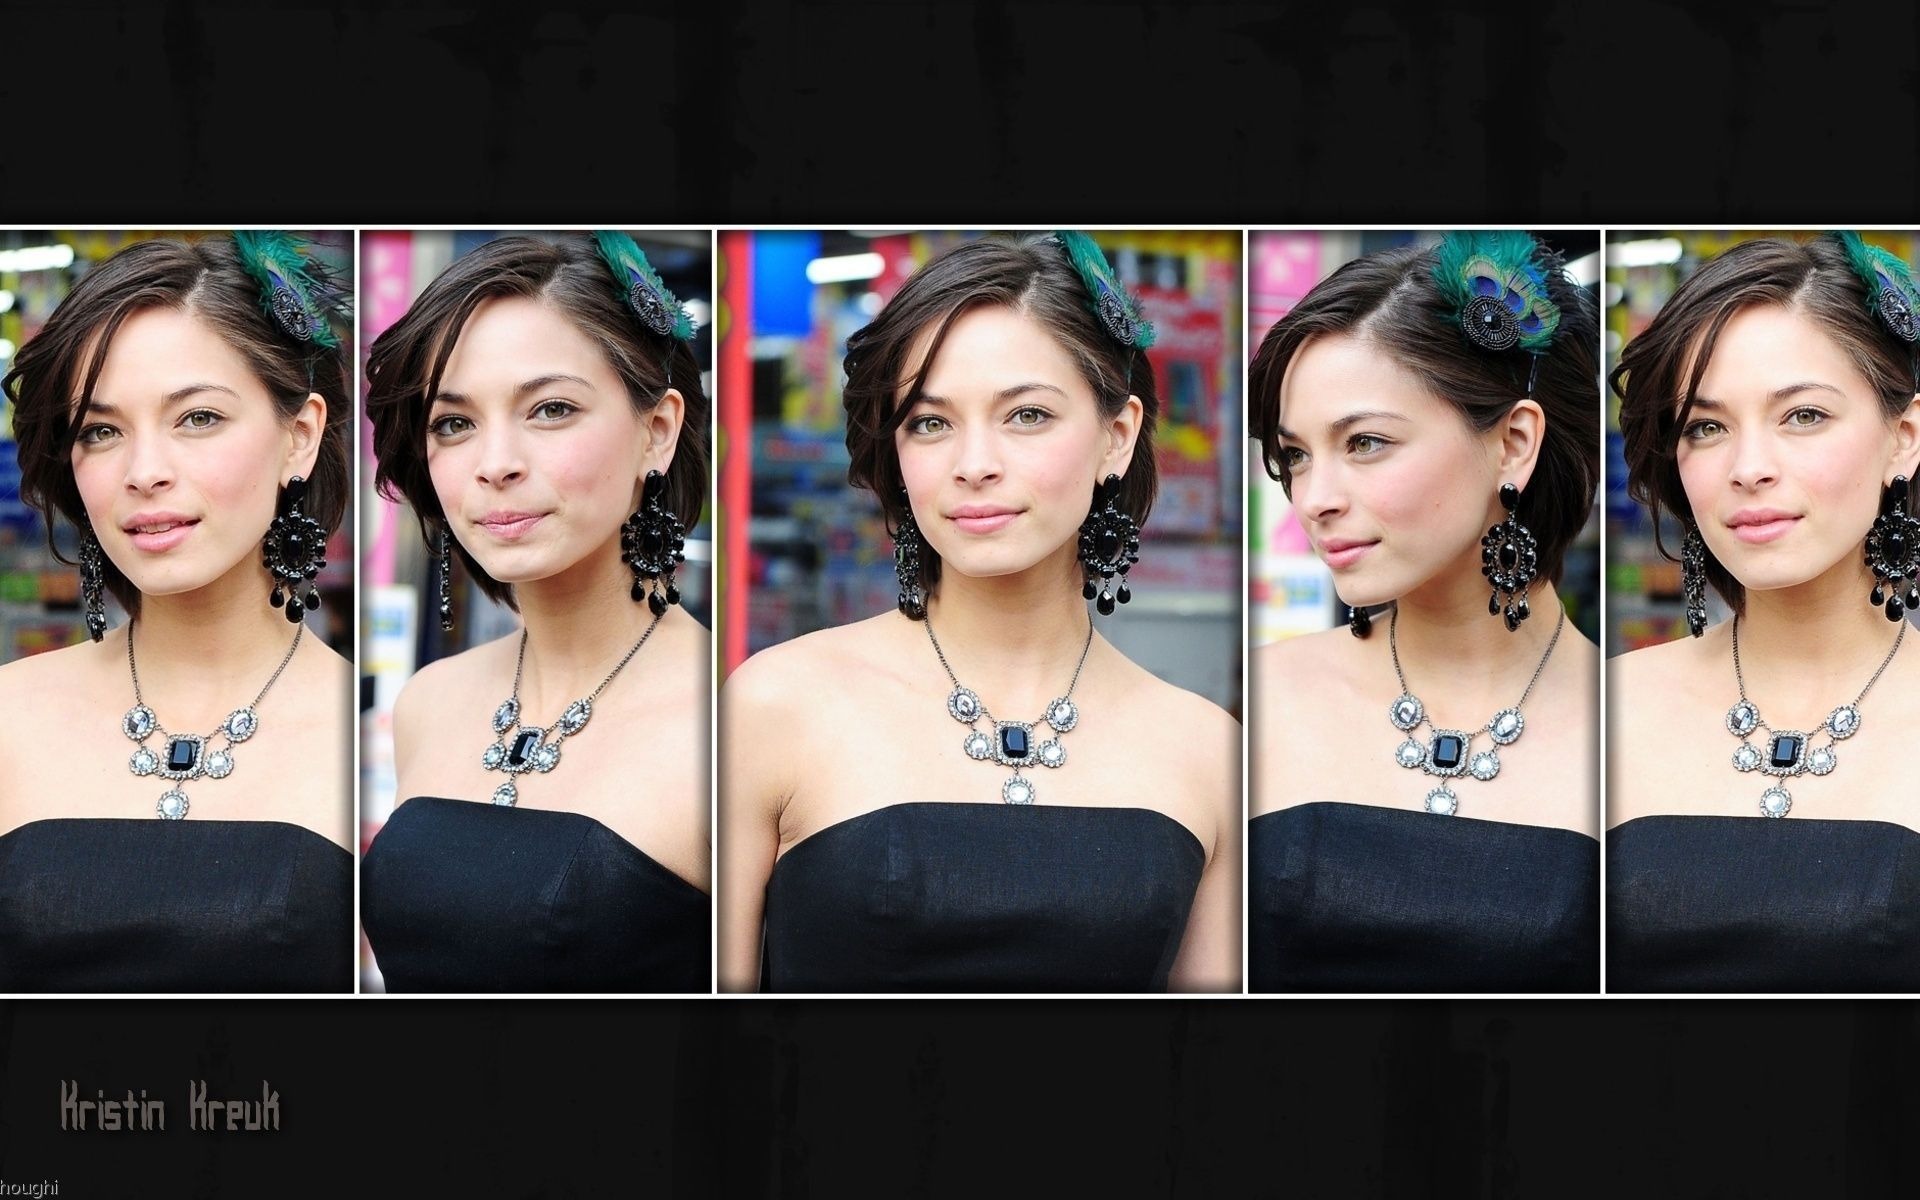 Kristin Kreuk #015 - 1920x1200 Wallpapers Pictures Photos Images